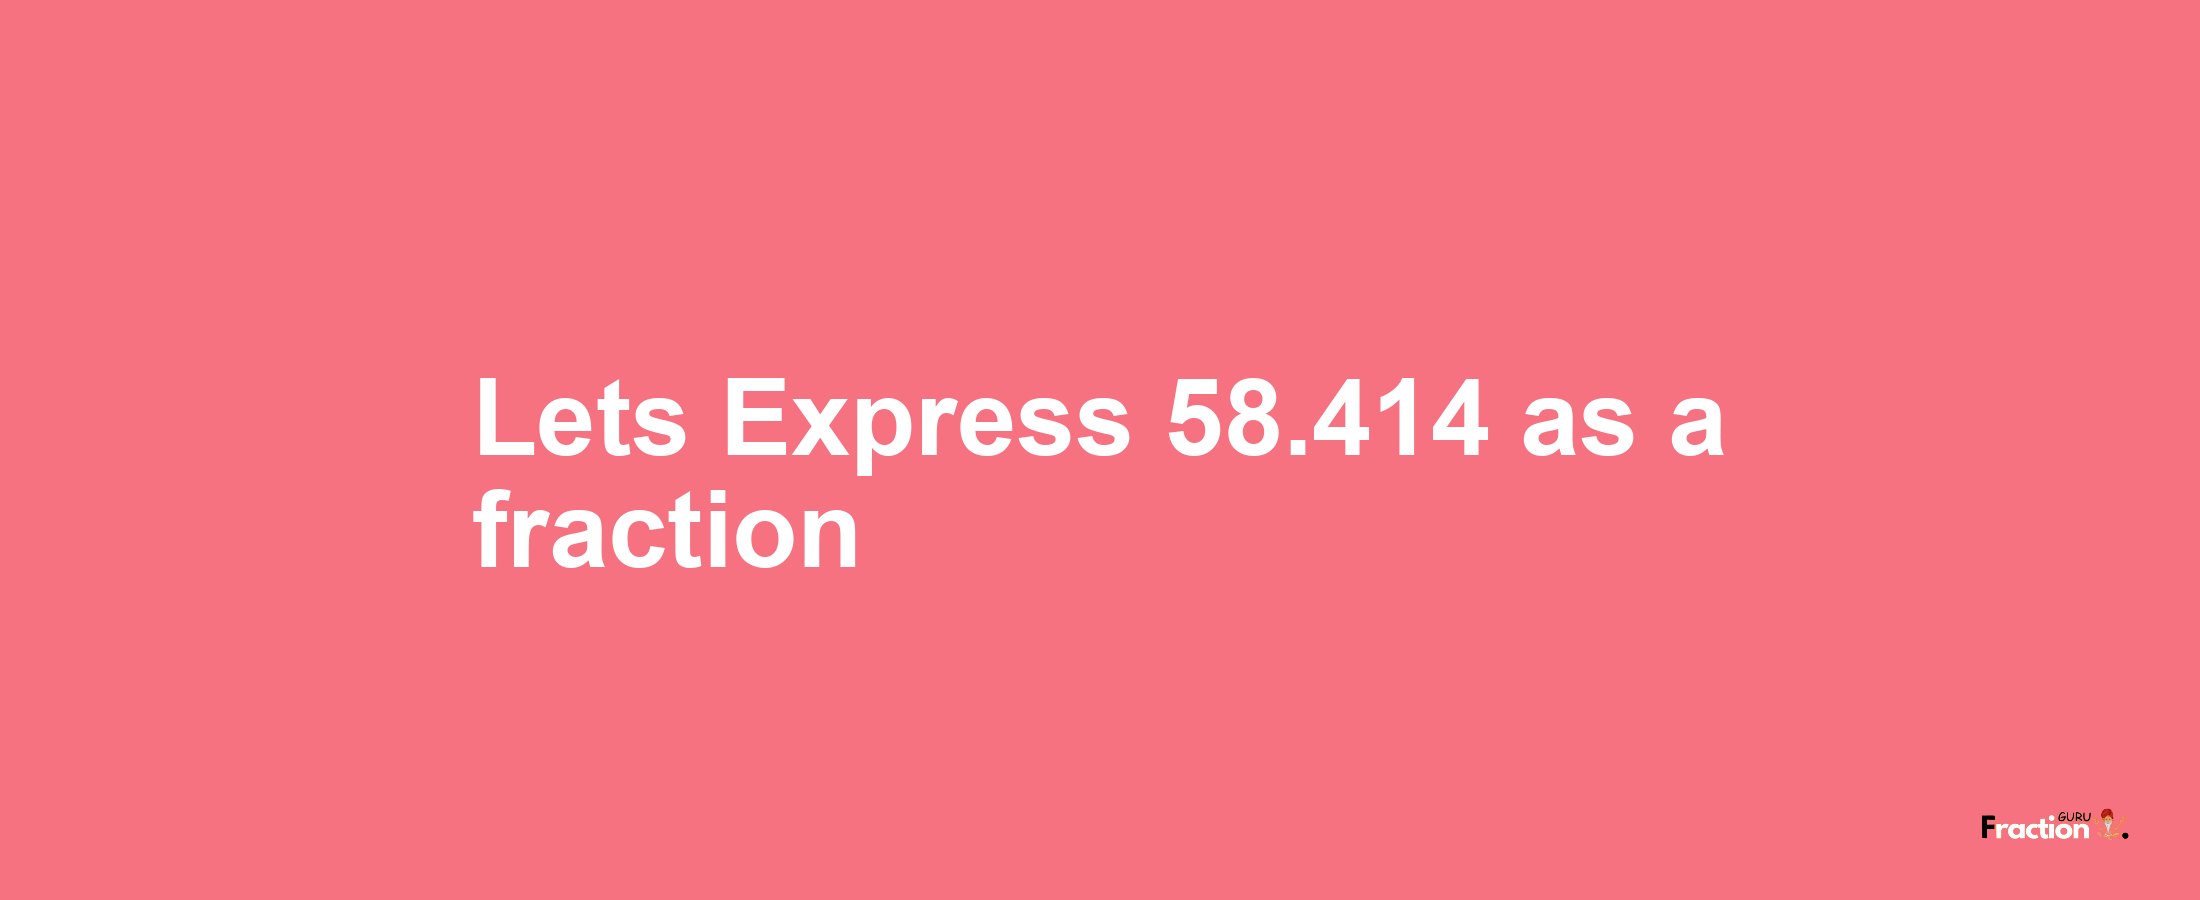 Lets Express 58.414 as afraction